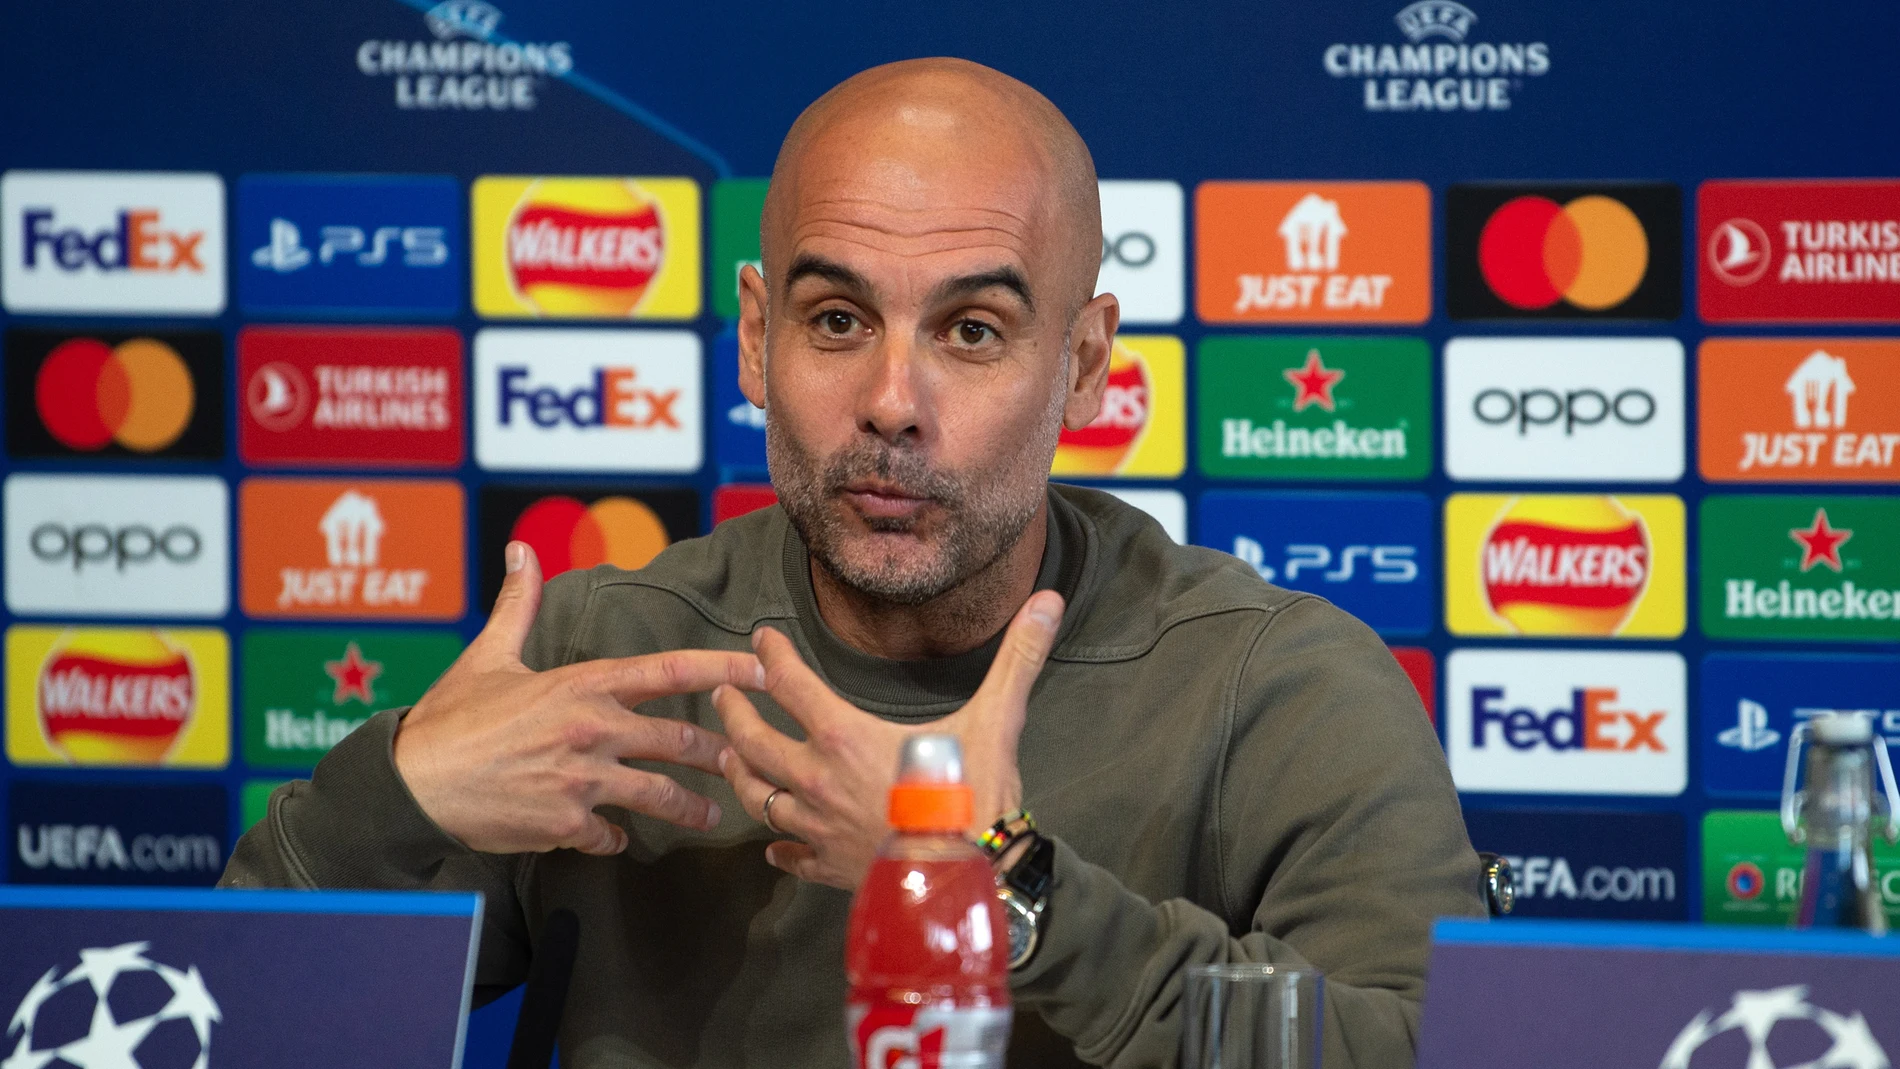 Manchester (United Kingdom), 16/05/2023.- Manchester City manager Pep Guardiola reacts during a press conference of the club in Manchester, Britain, 16 May 2023. Manchester City face Real Madrid in a UEFA Champions League semi-finals, 2nd leg soccer match on 17 May. (Liga de Campeones, Reino Unido) EFE/EPA/PETER POWELL 